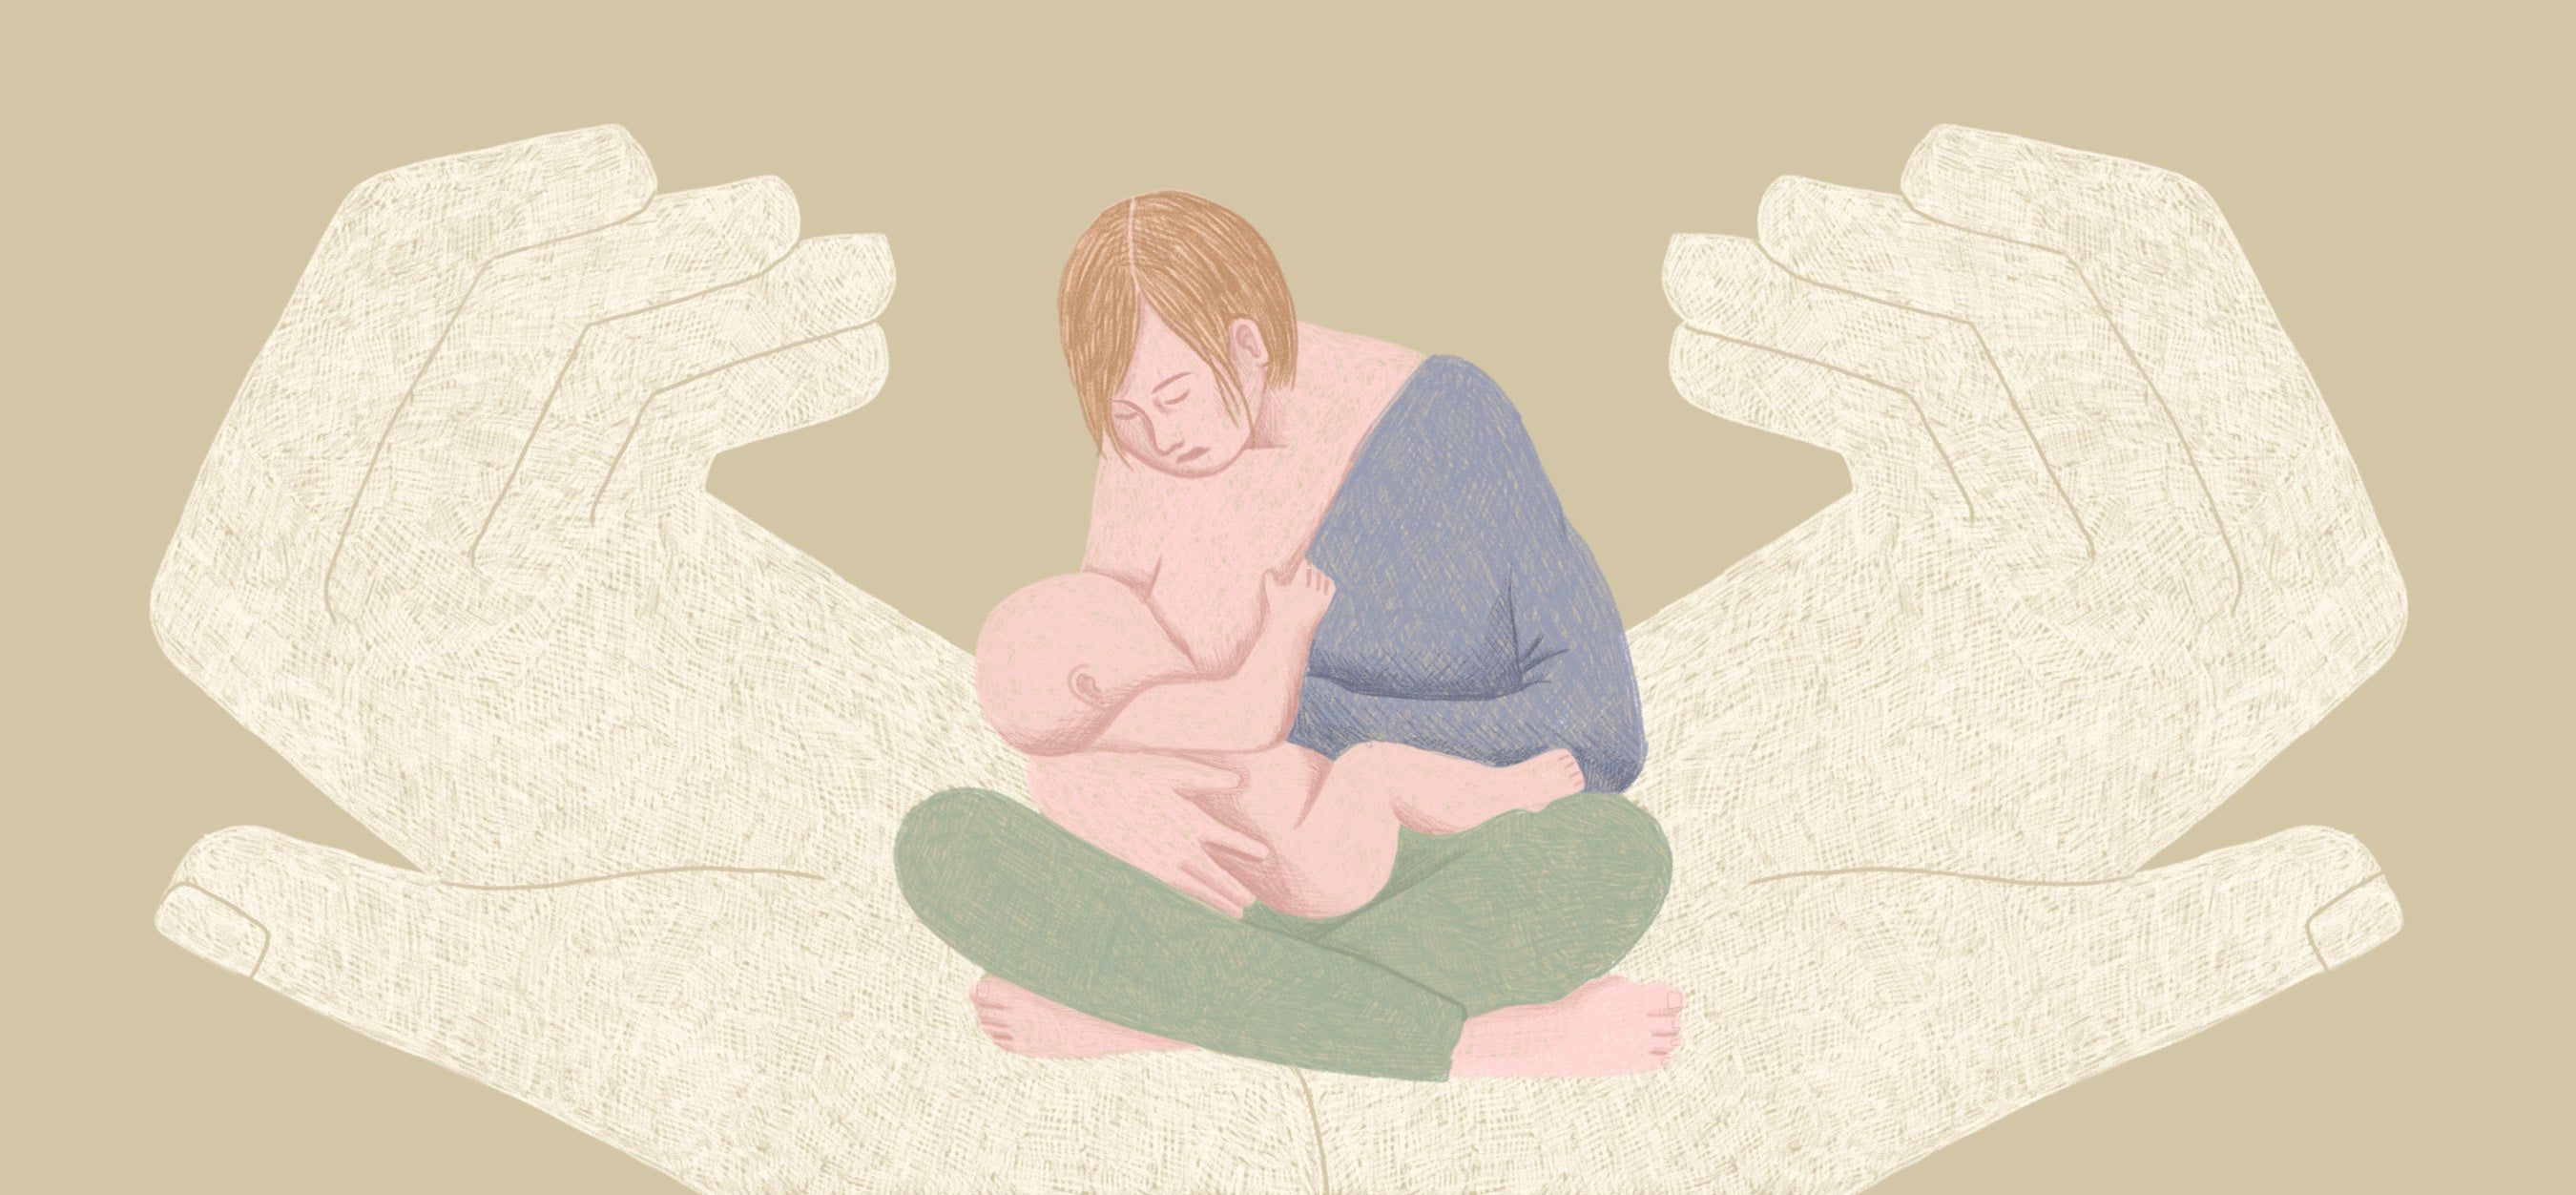 illustration of a woman breastfeeding in the palm of a giant hand